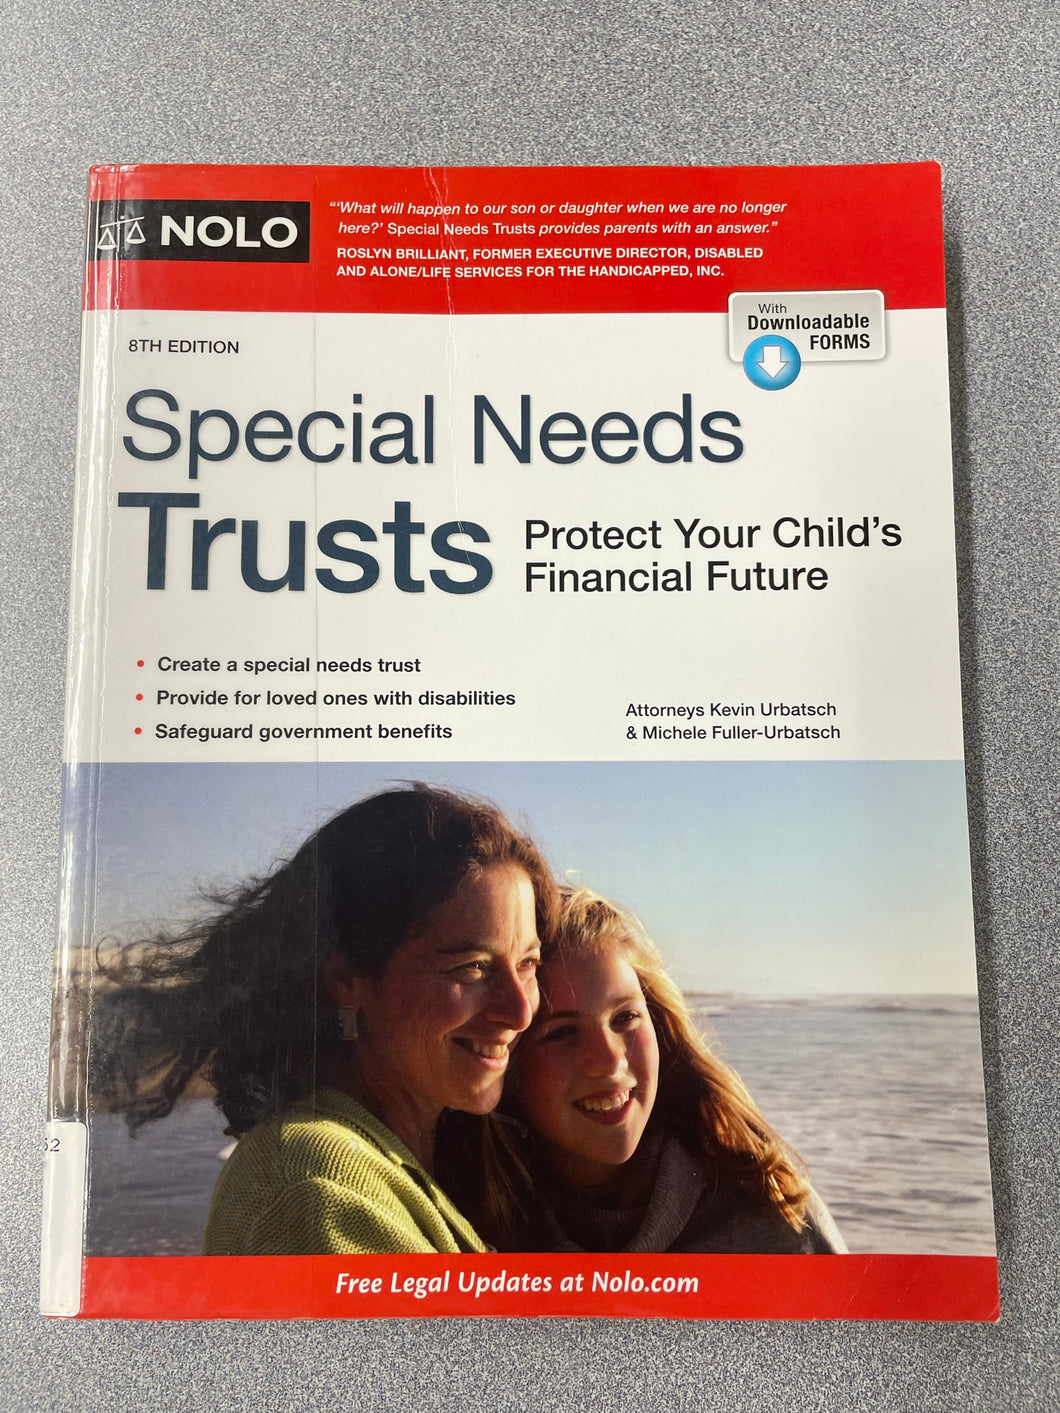 Special Needs Trusts: Protect Your child's Financial Future, Urbatsch, Kevin and Michele Fuller-Urbatsch  [2019] LAW 10/22